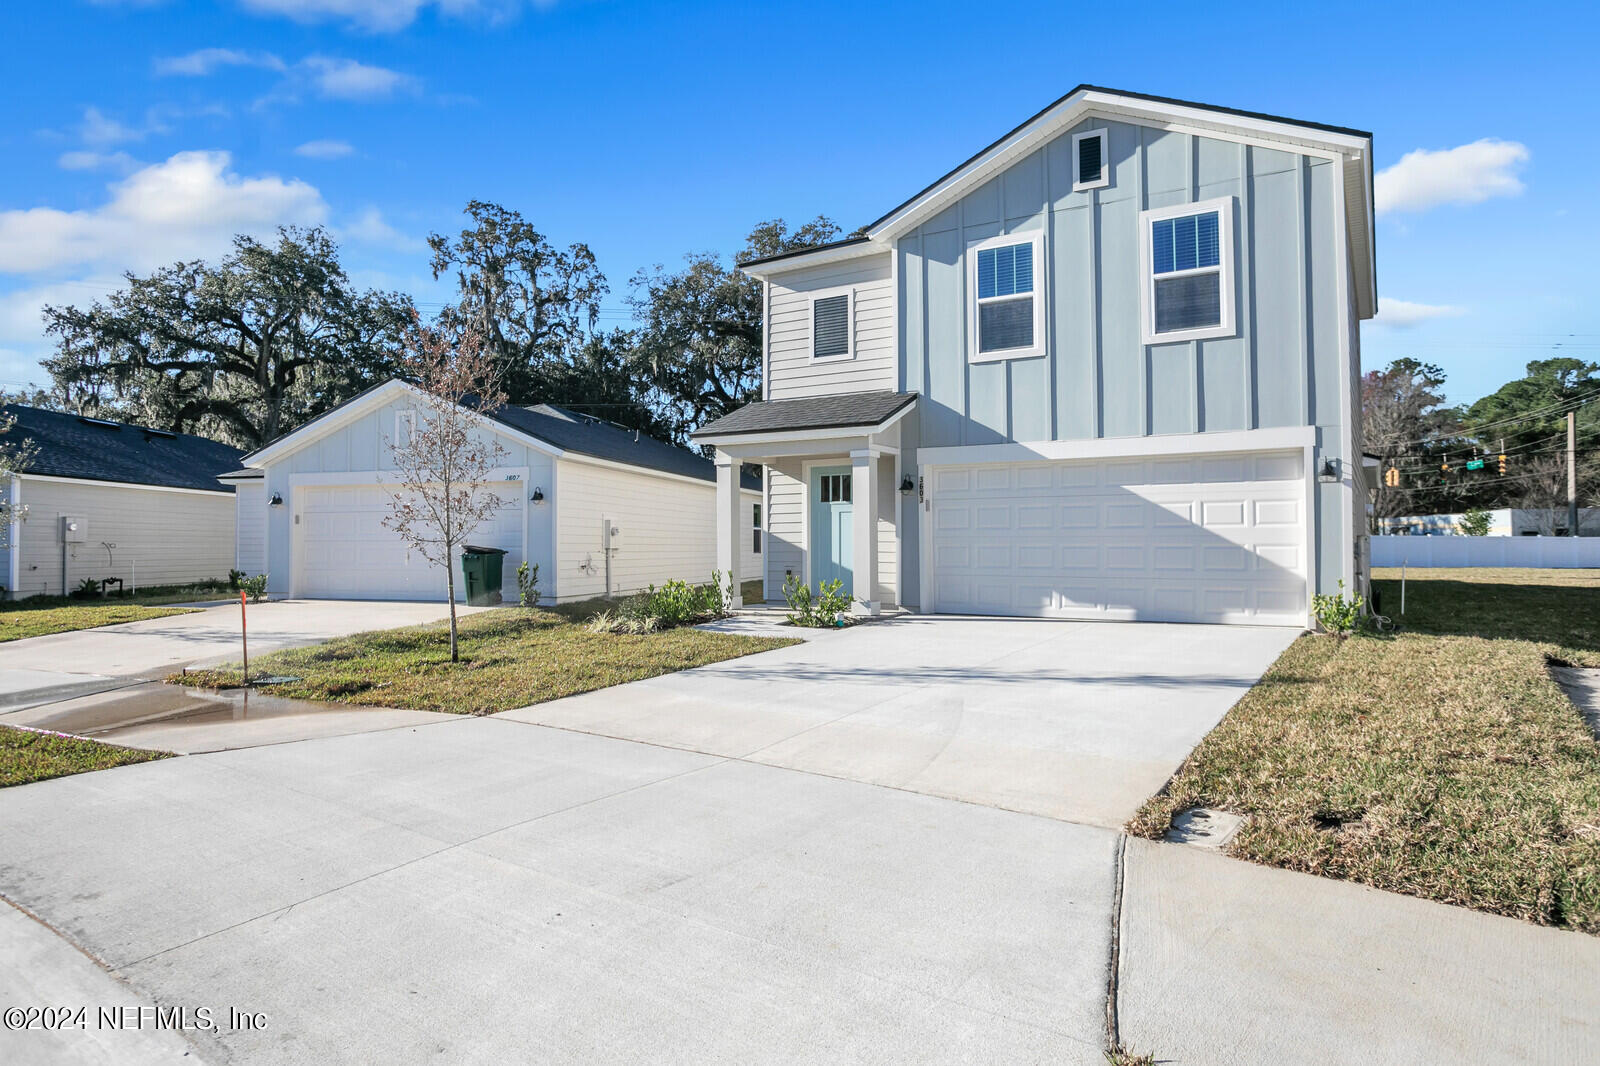 Jacksonville, FL home for sale located at 3595 Mildred Way Lot 50, Jacksonville, FL 32254